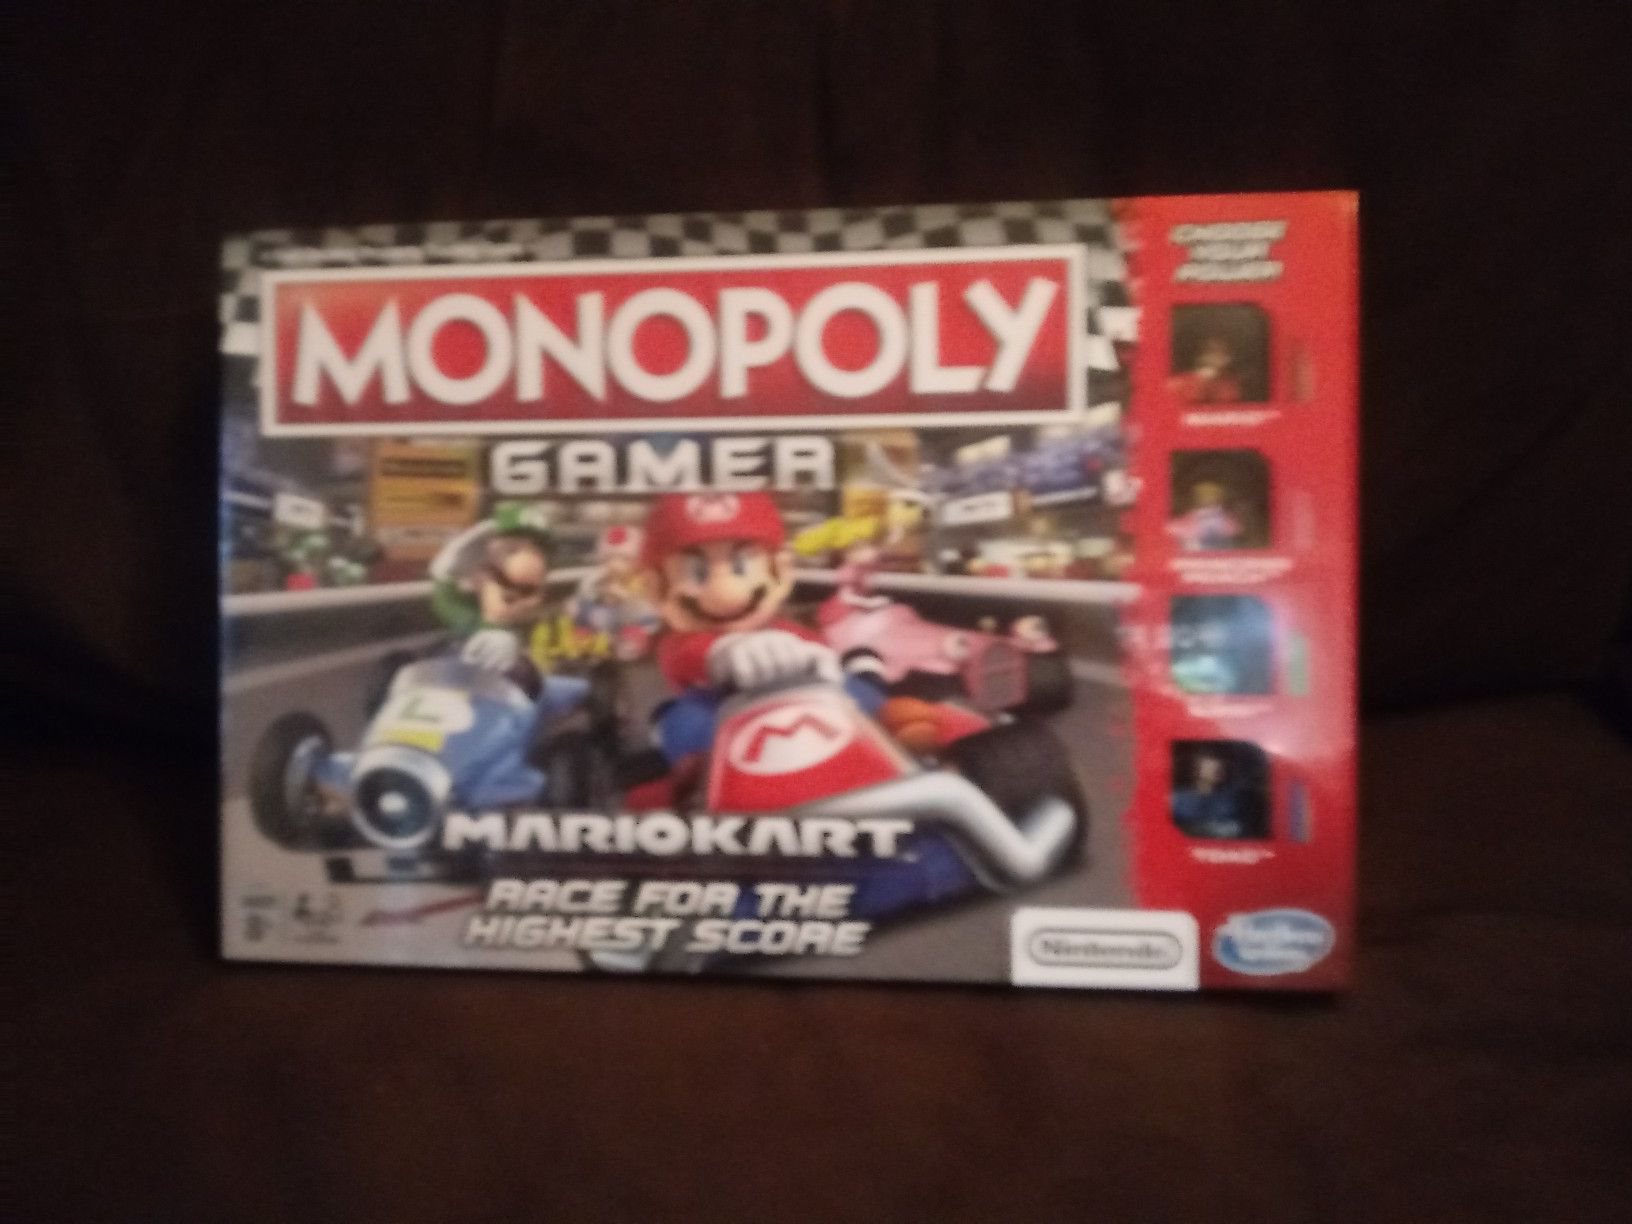 I'm selling a Mario's brothers game.Monopoly game.This game just came out.in brand New condition